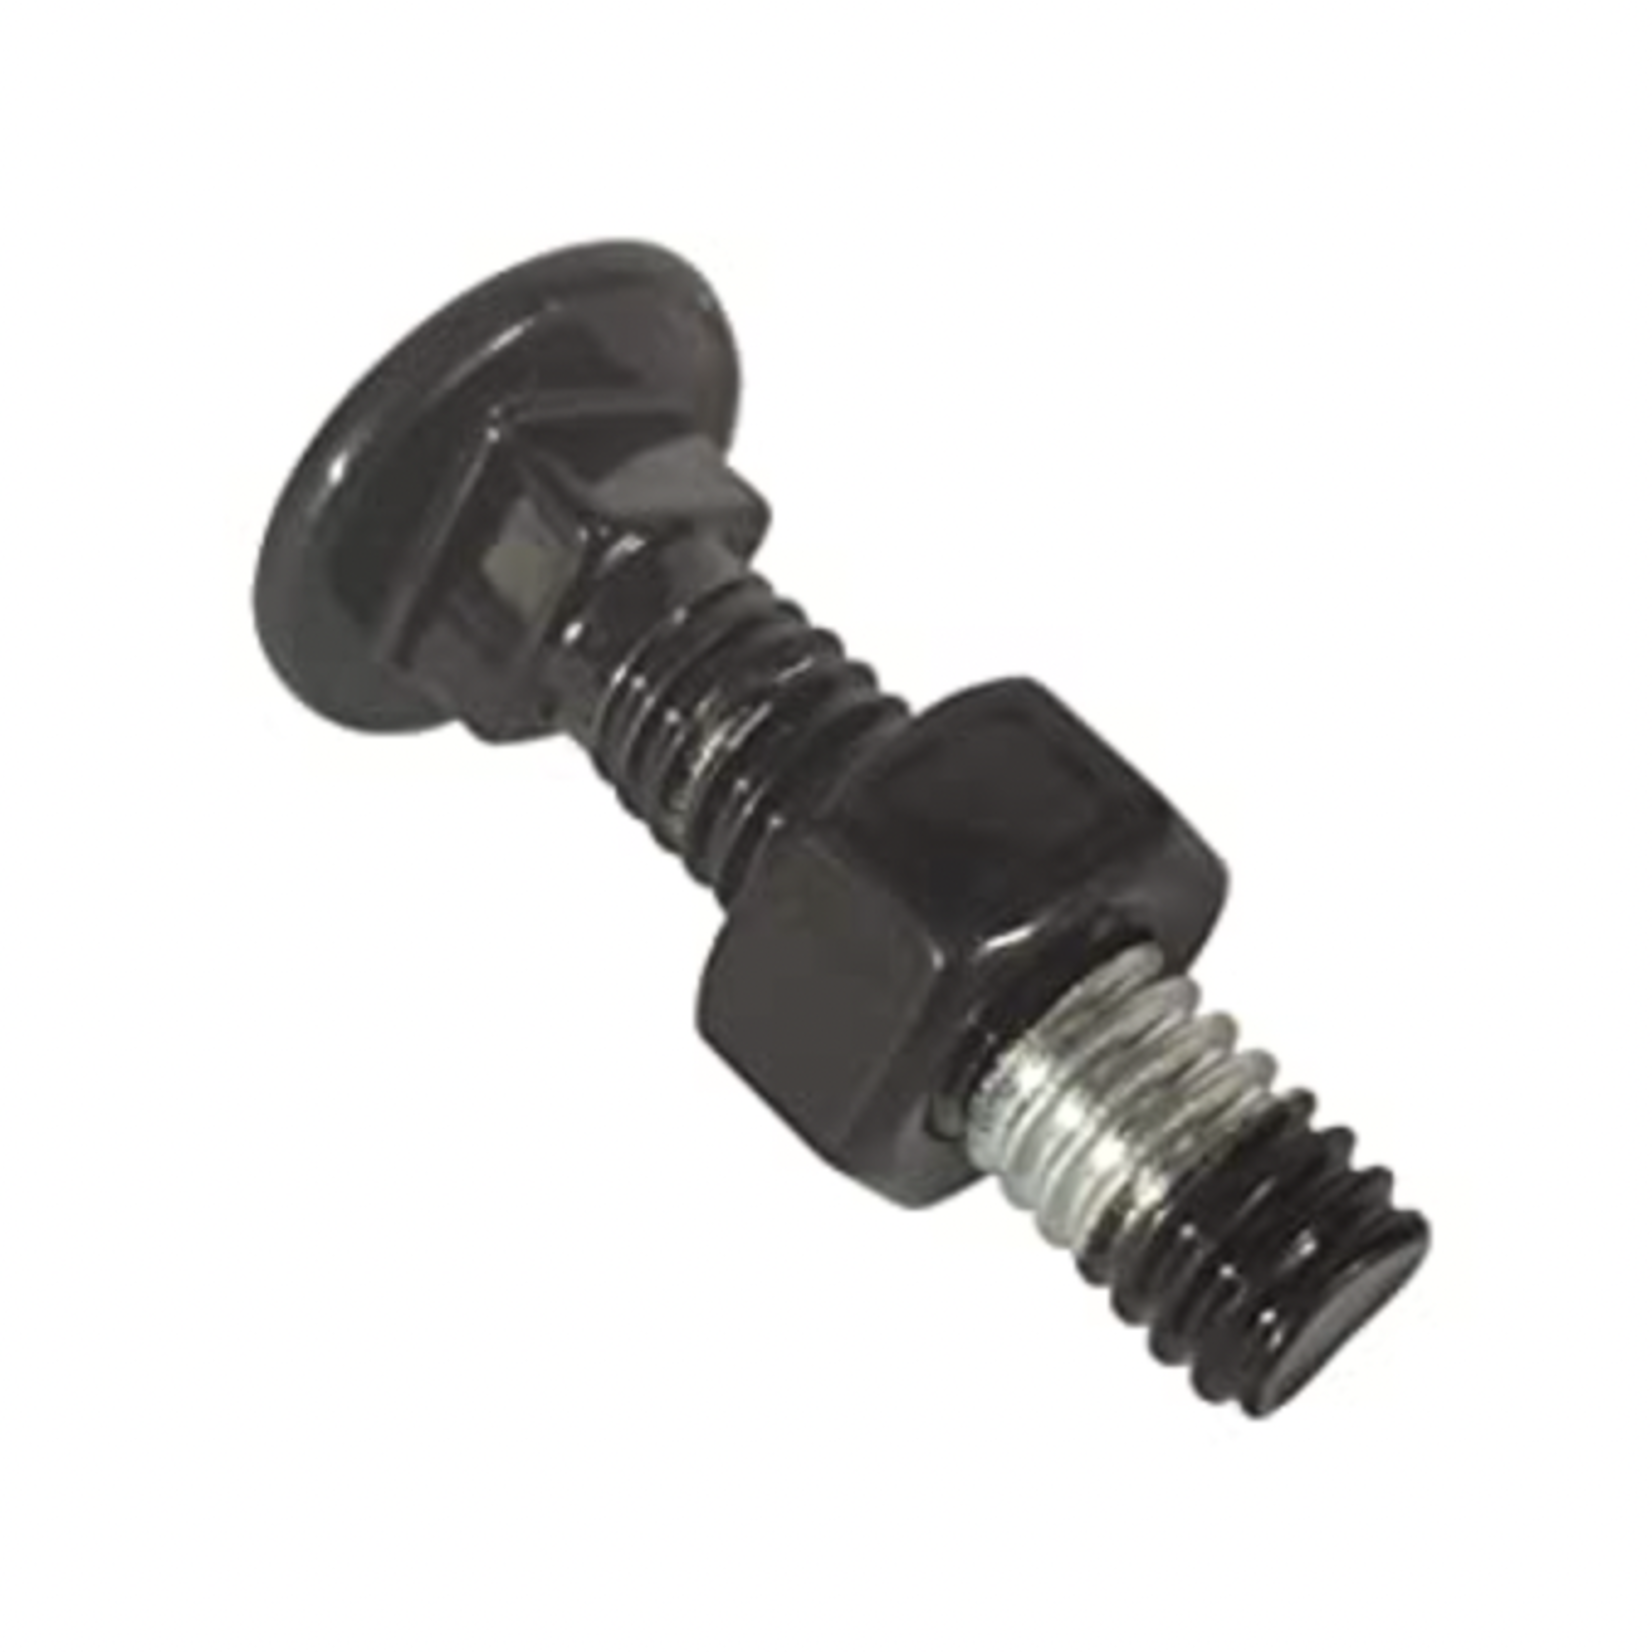 5/16 in. x 1-1/4 in. Black Carriage Bolt & Nut